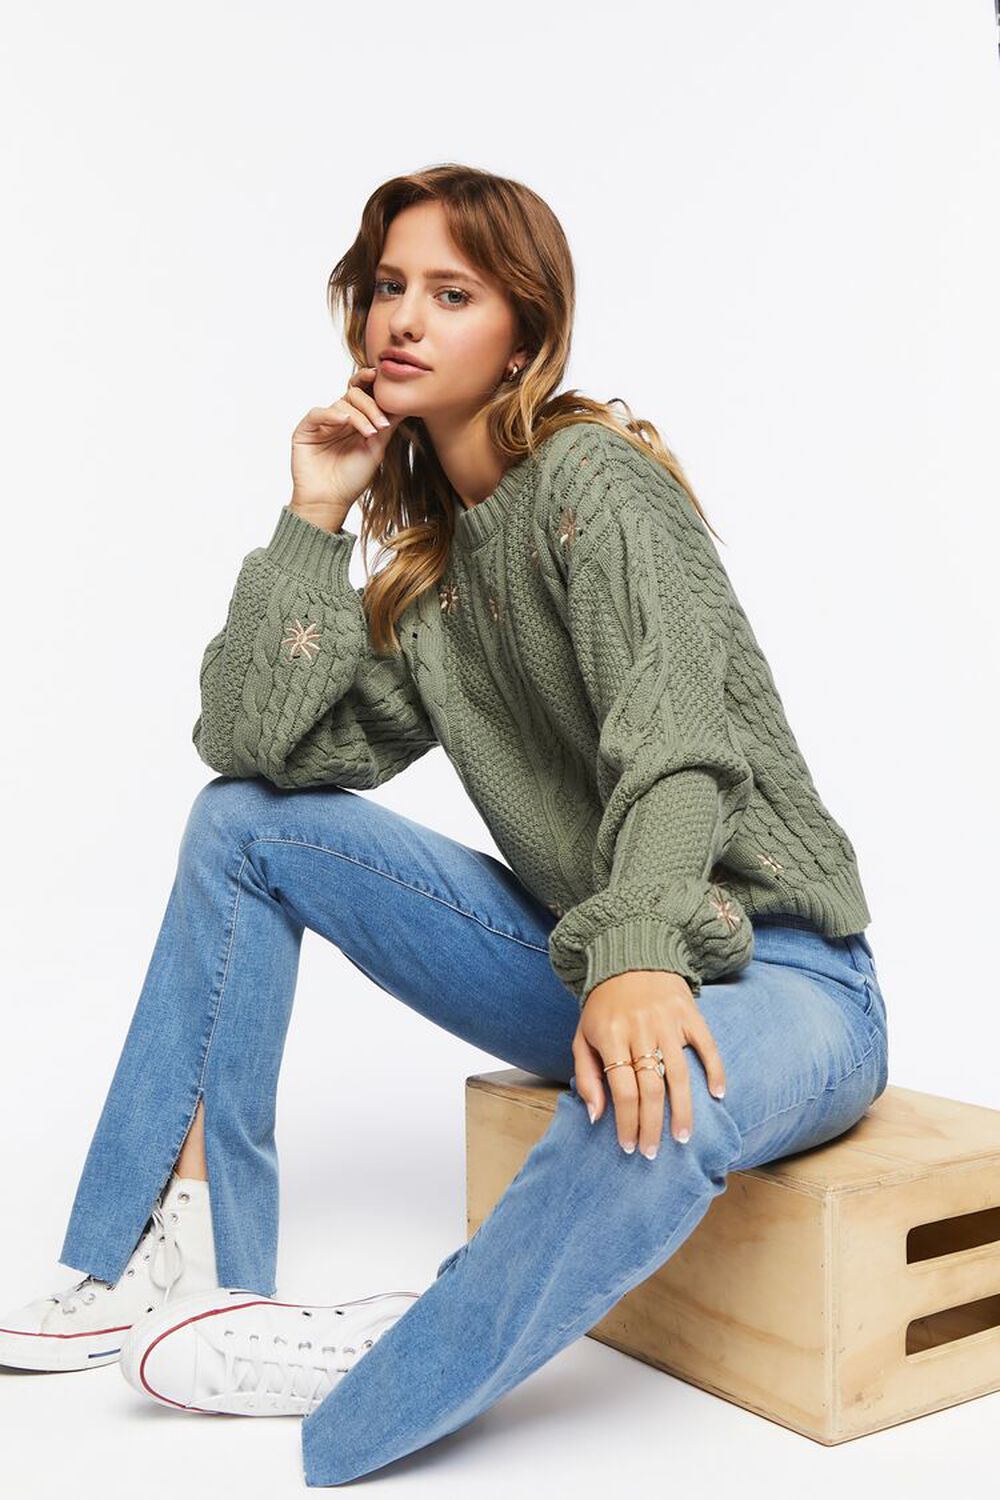 GREEN/TAN Embroidered Floral Cable Knit Sweater, image 1